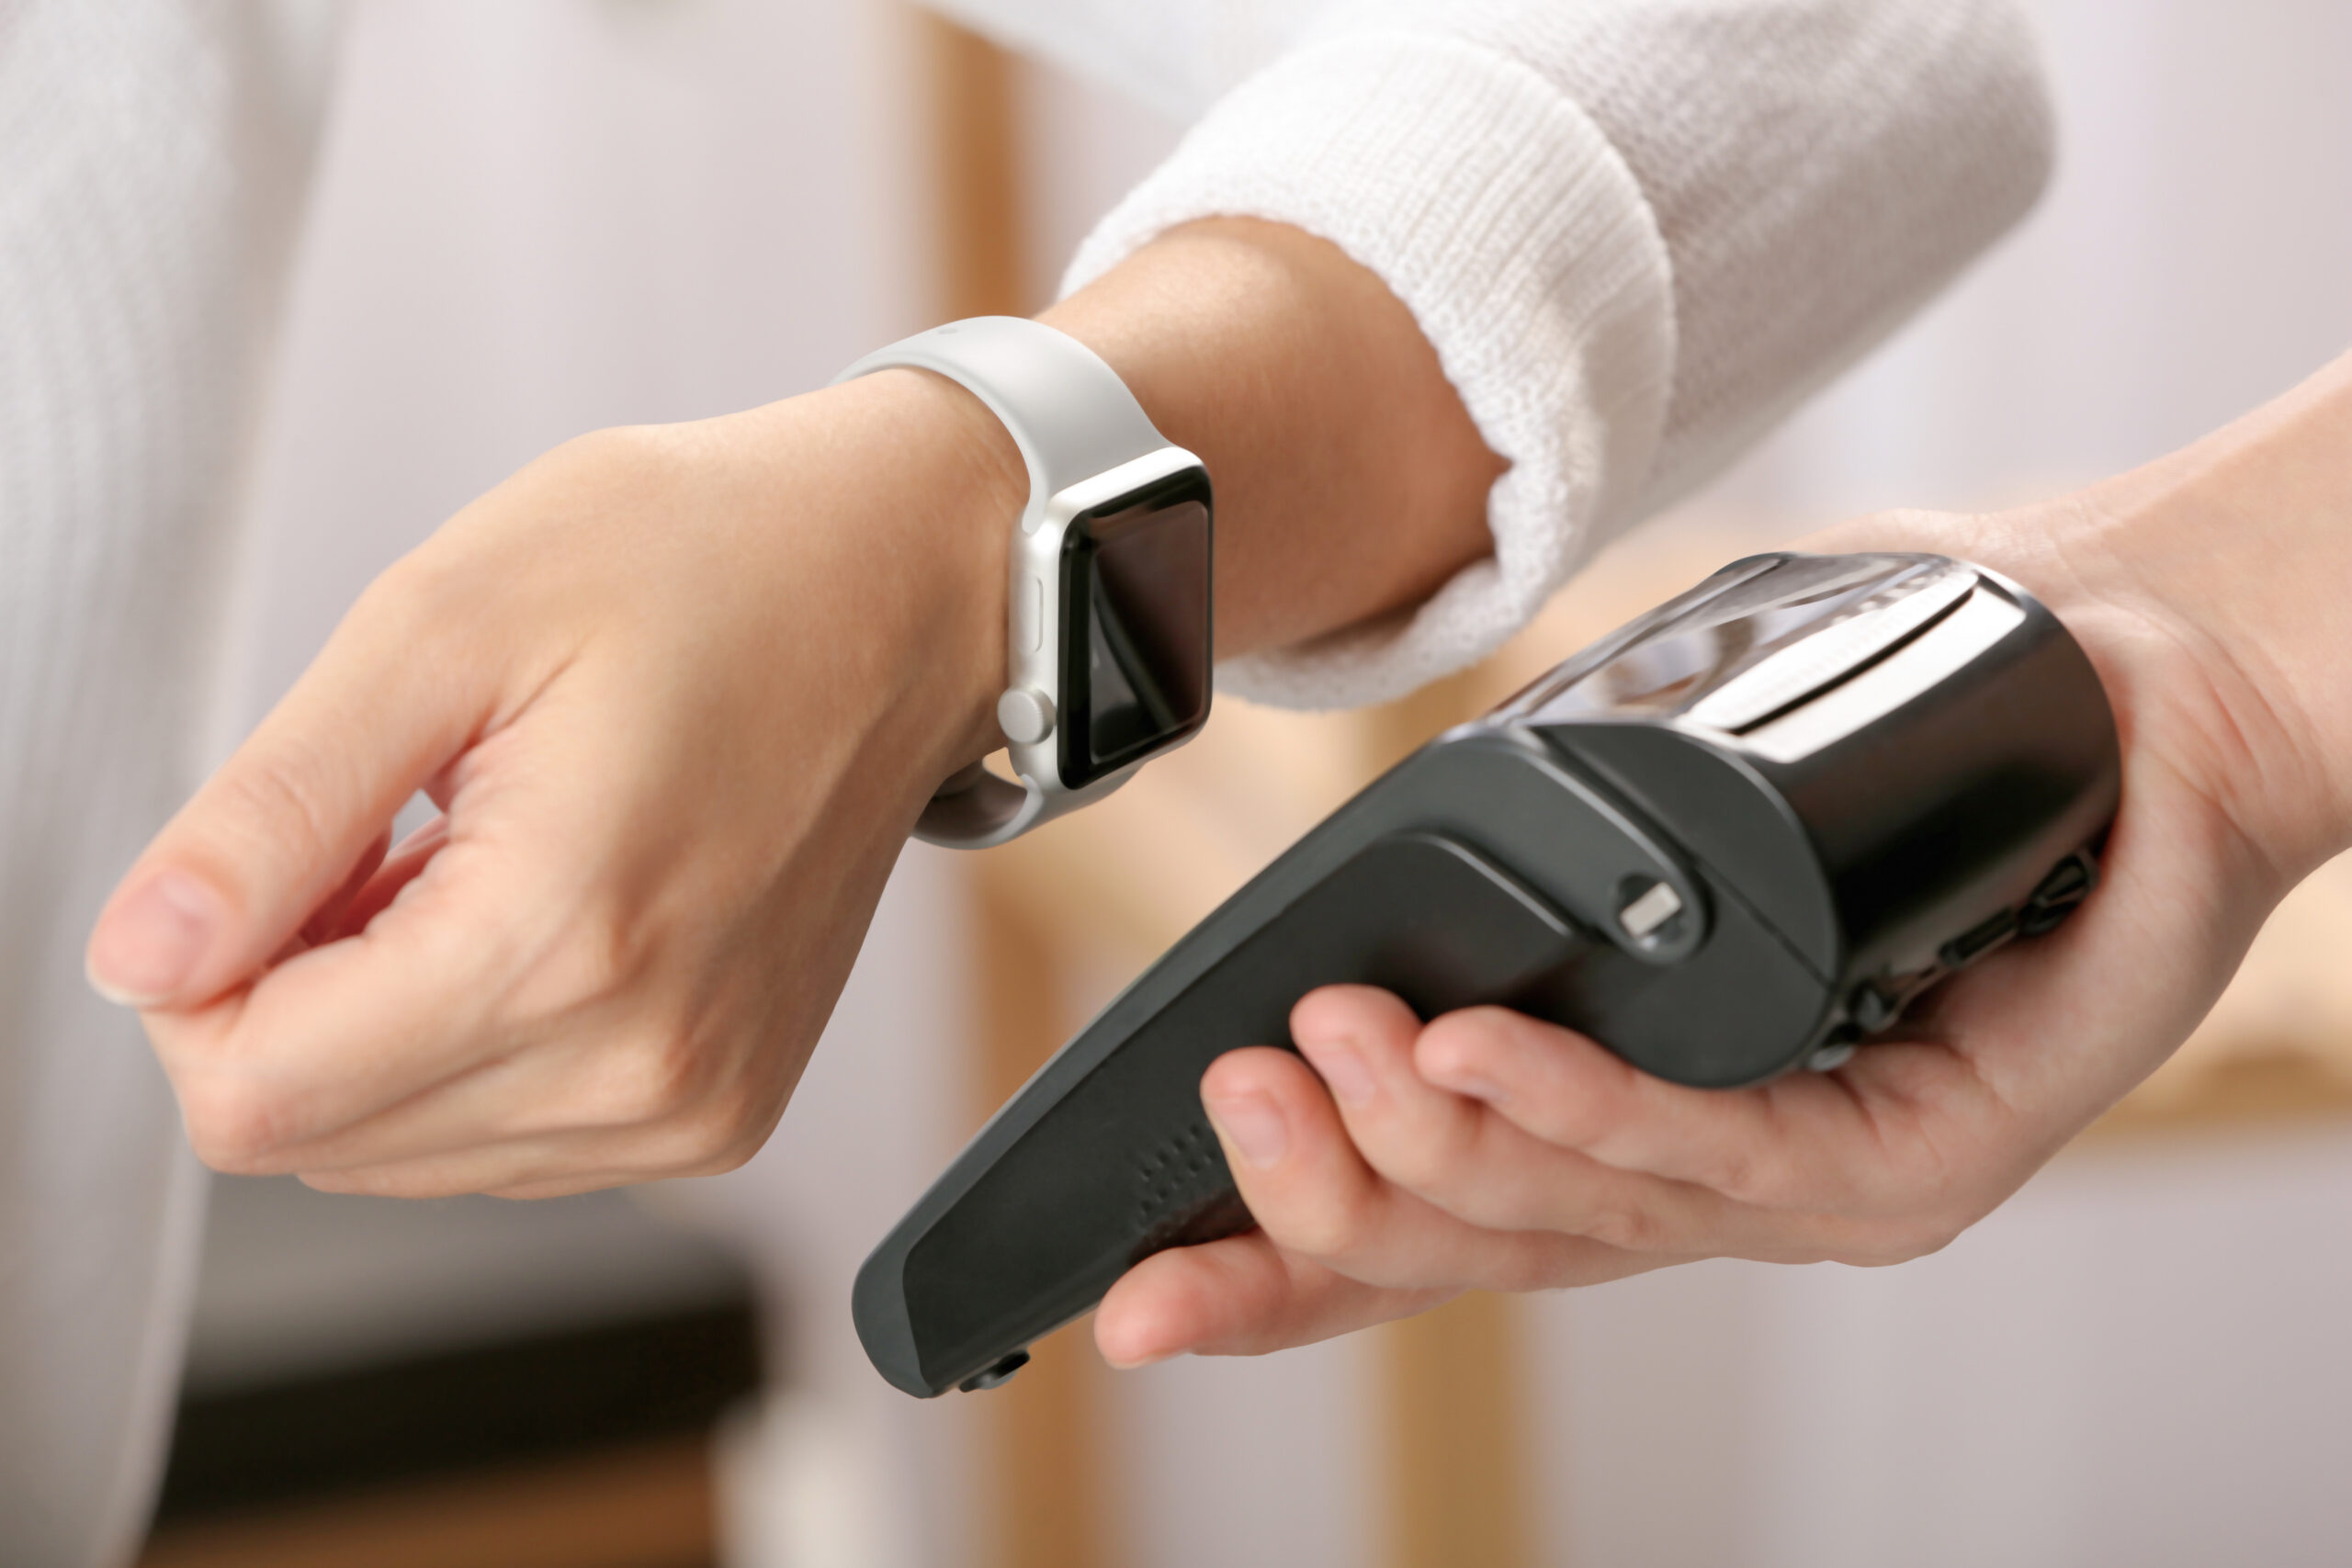 contactless payment with smart watch - Globetrender